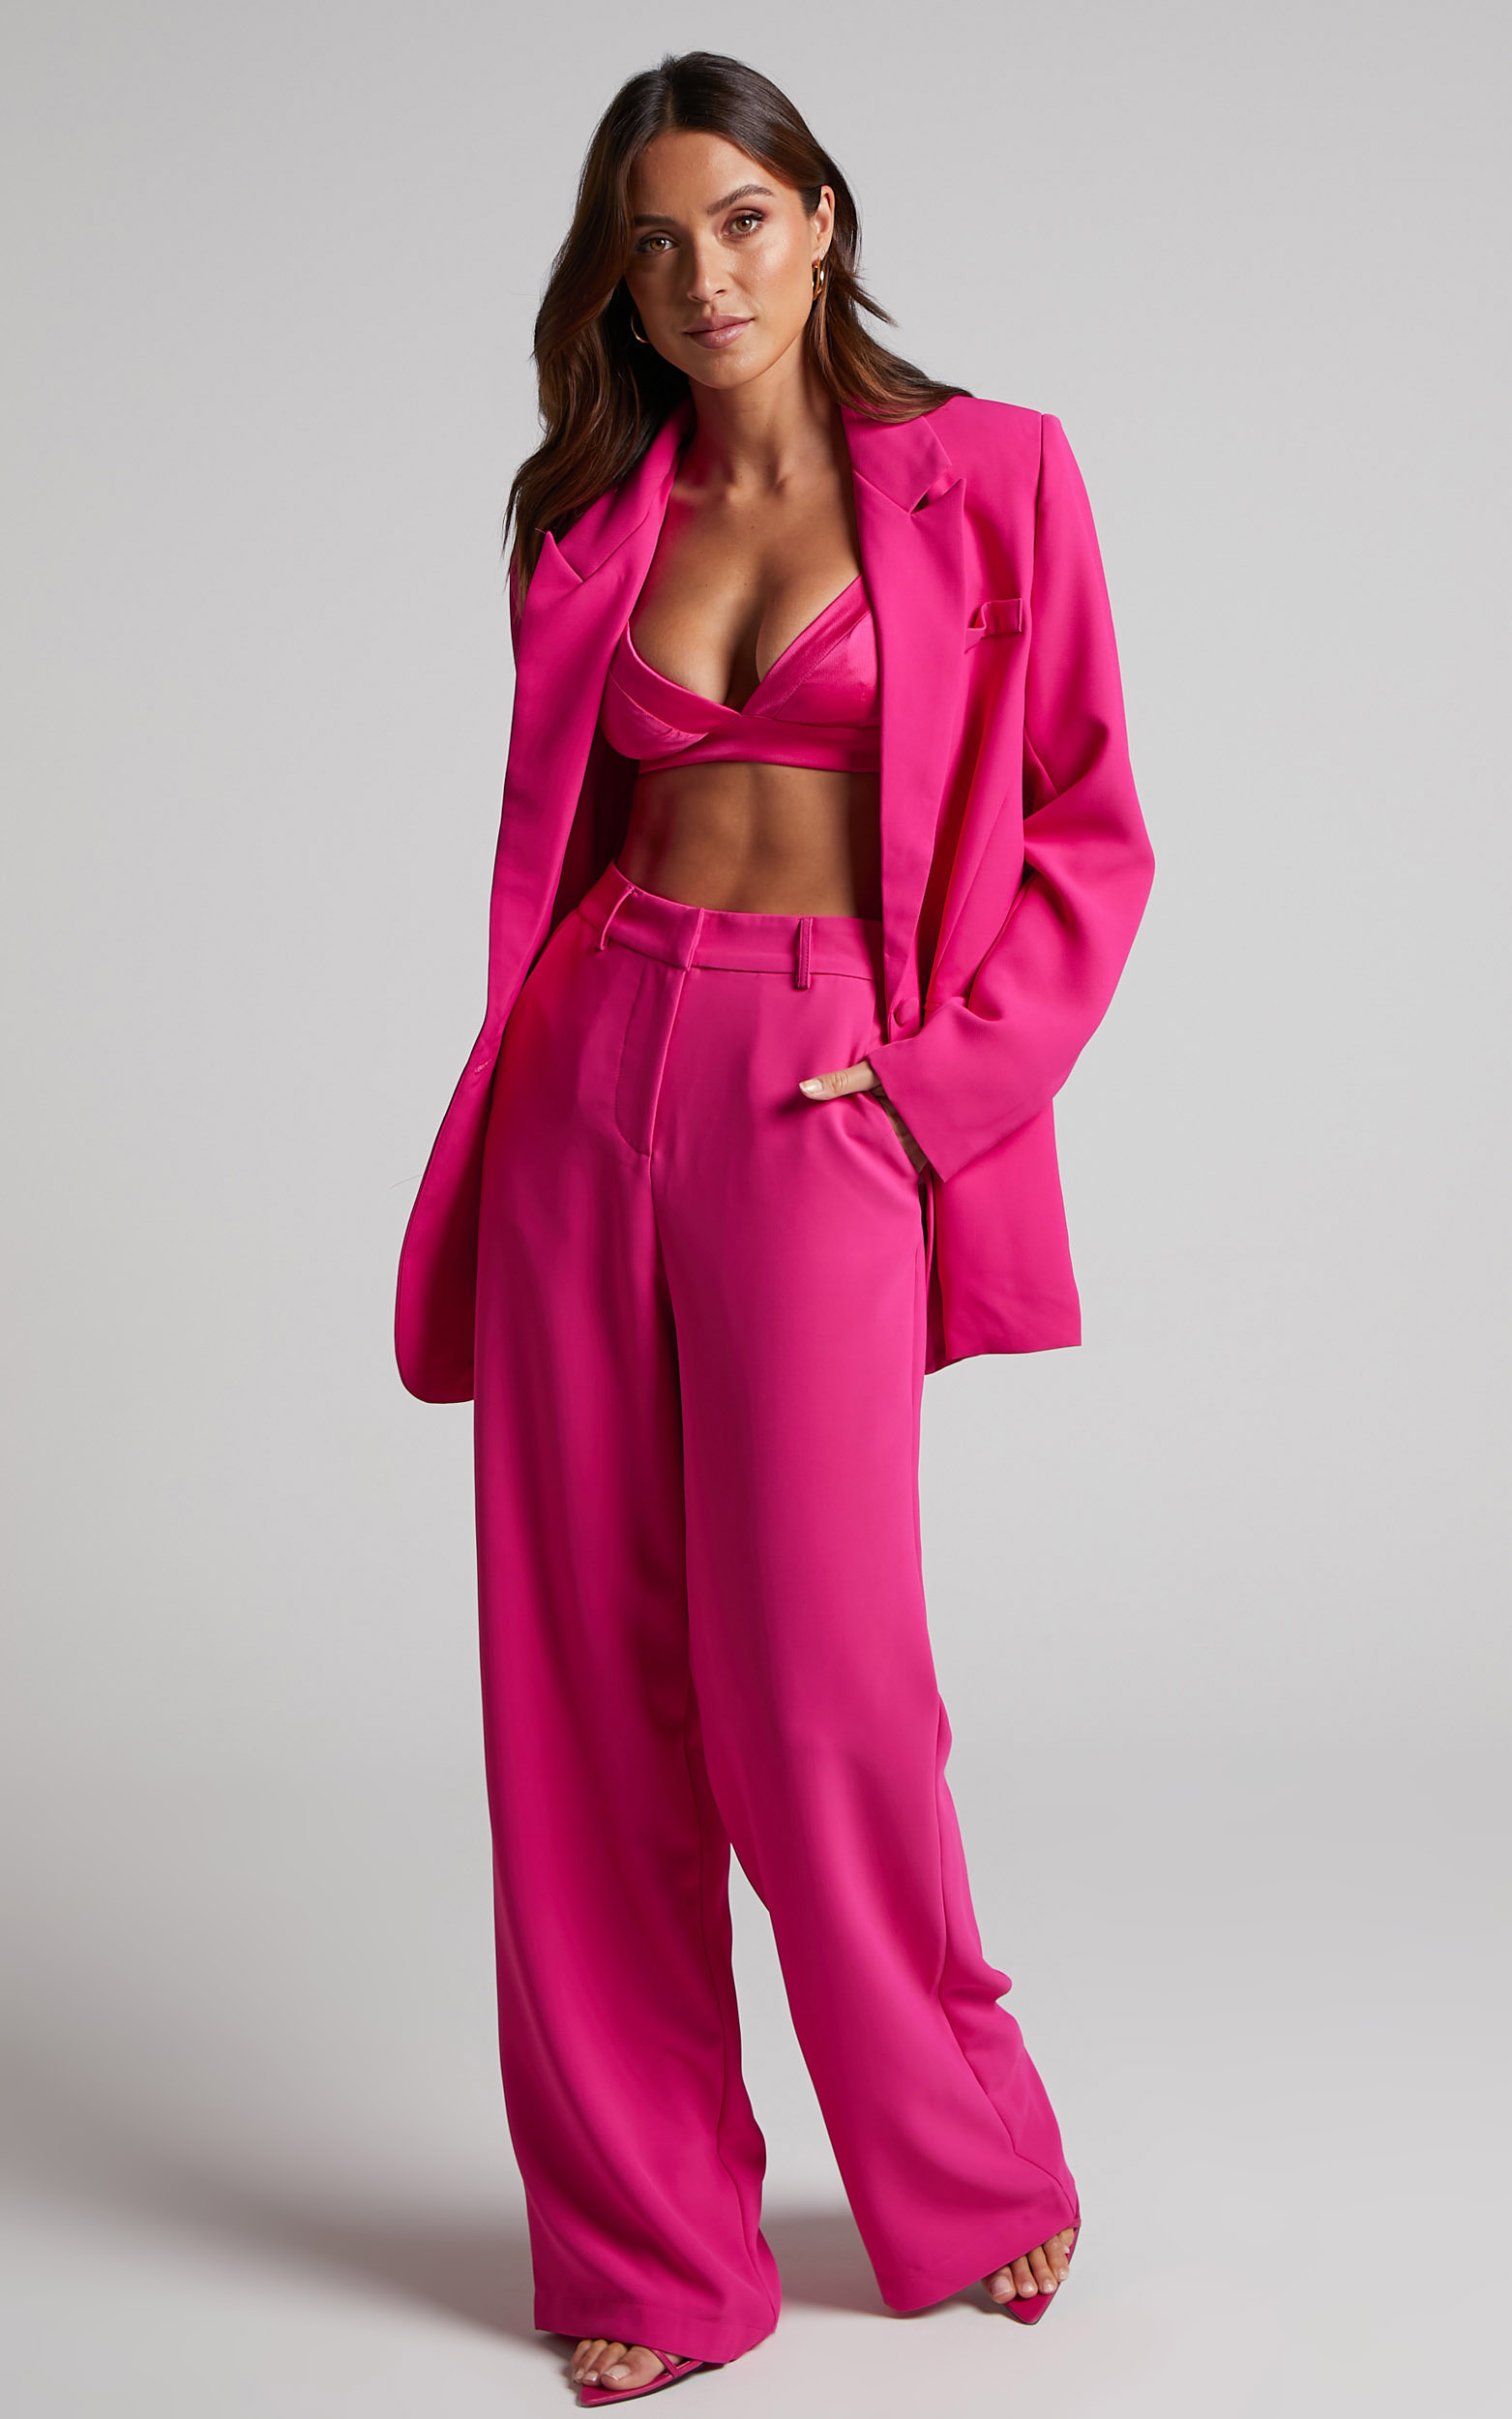 Bonnie Tailored Wide Leg Pants in Pink - 04, PNK1, hi-res image number null